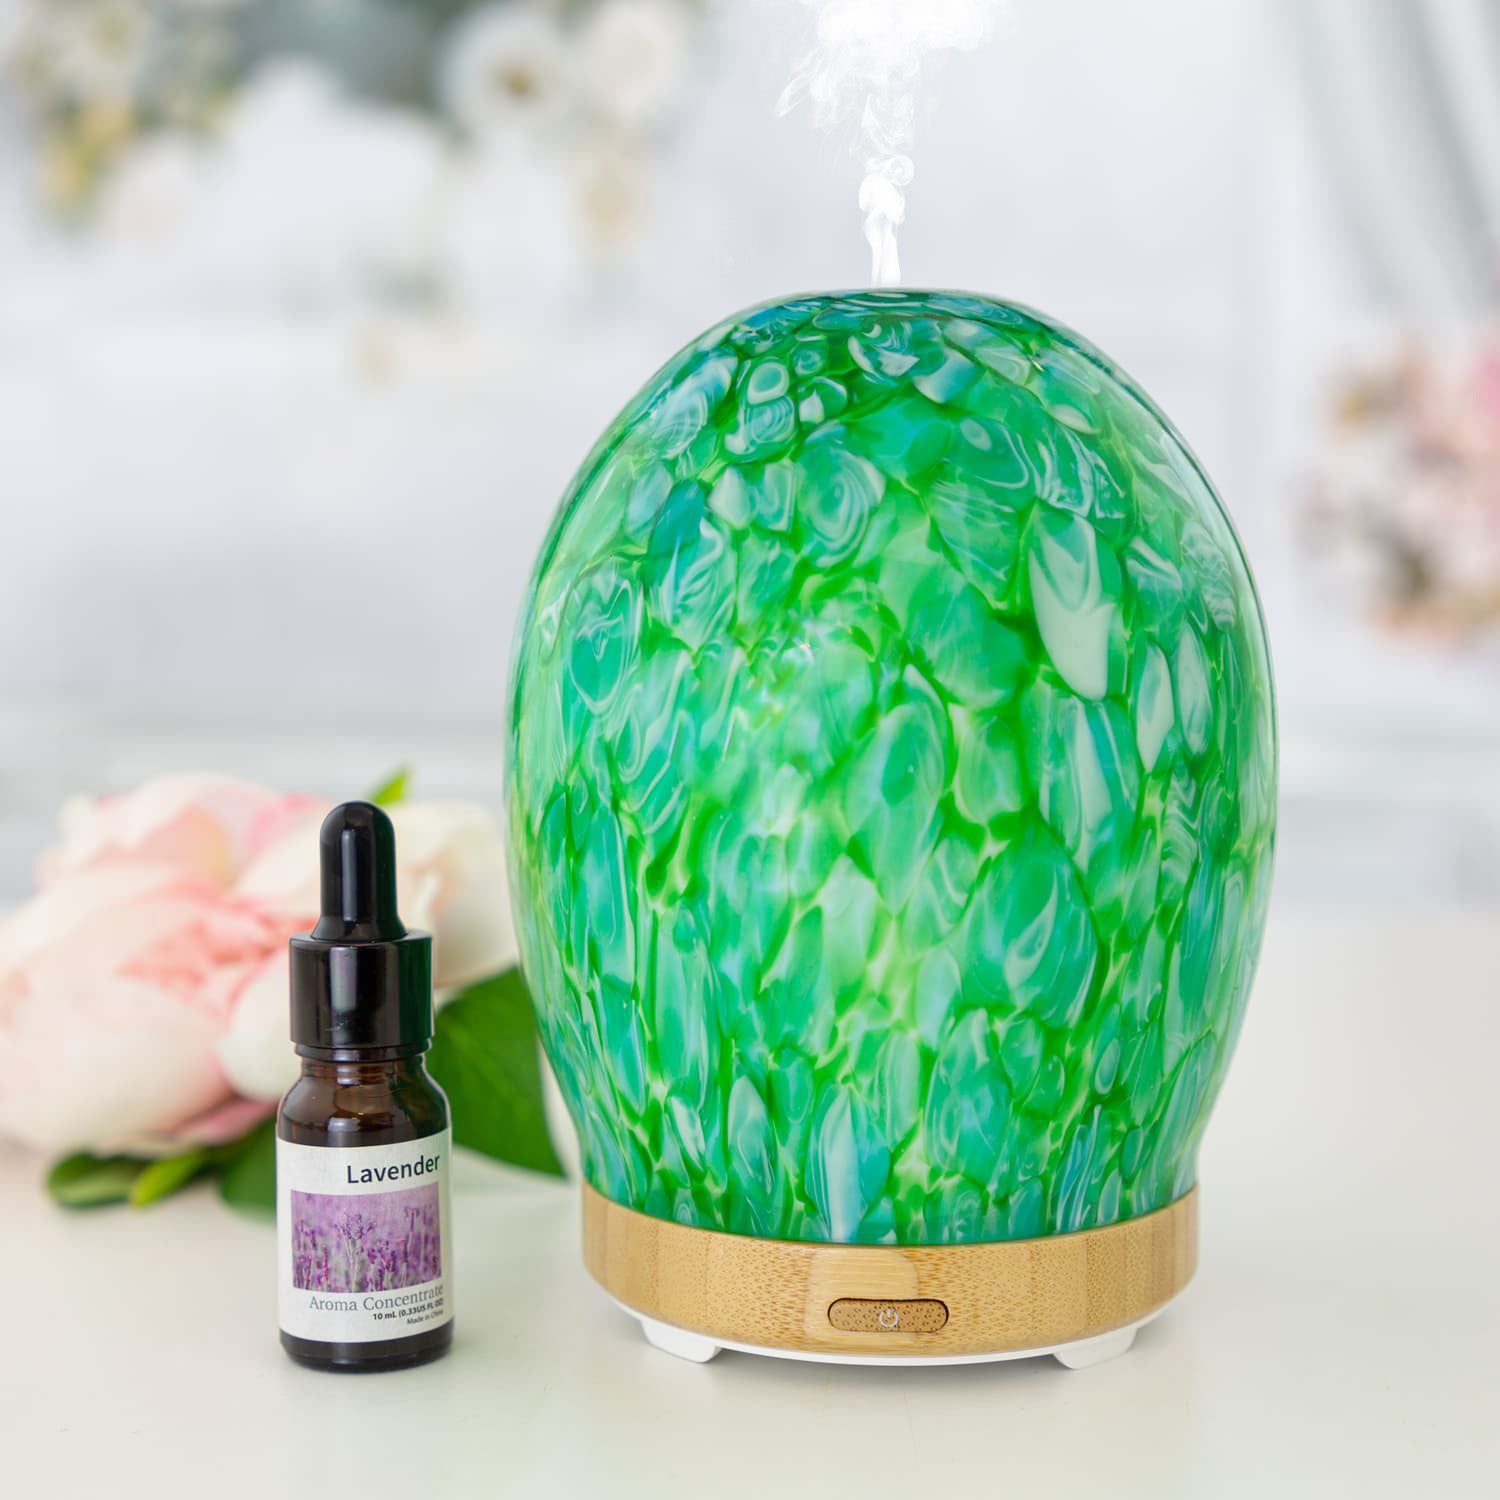 100ml Marbelized Hand-Blown Glass Aroma Diffuser + Essential Aroma Lavender Diffuser Sympler   